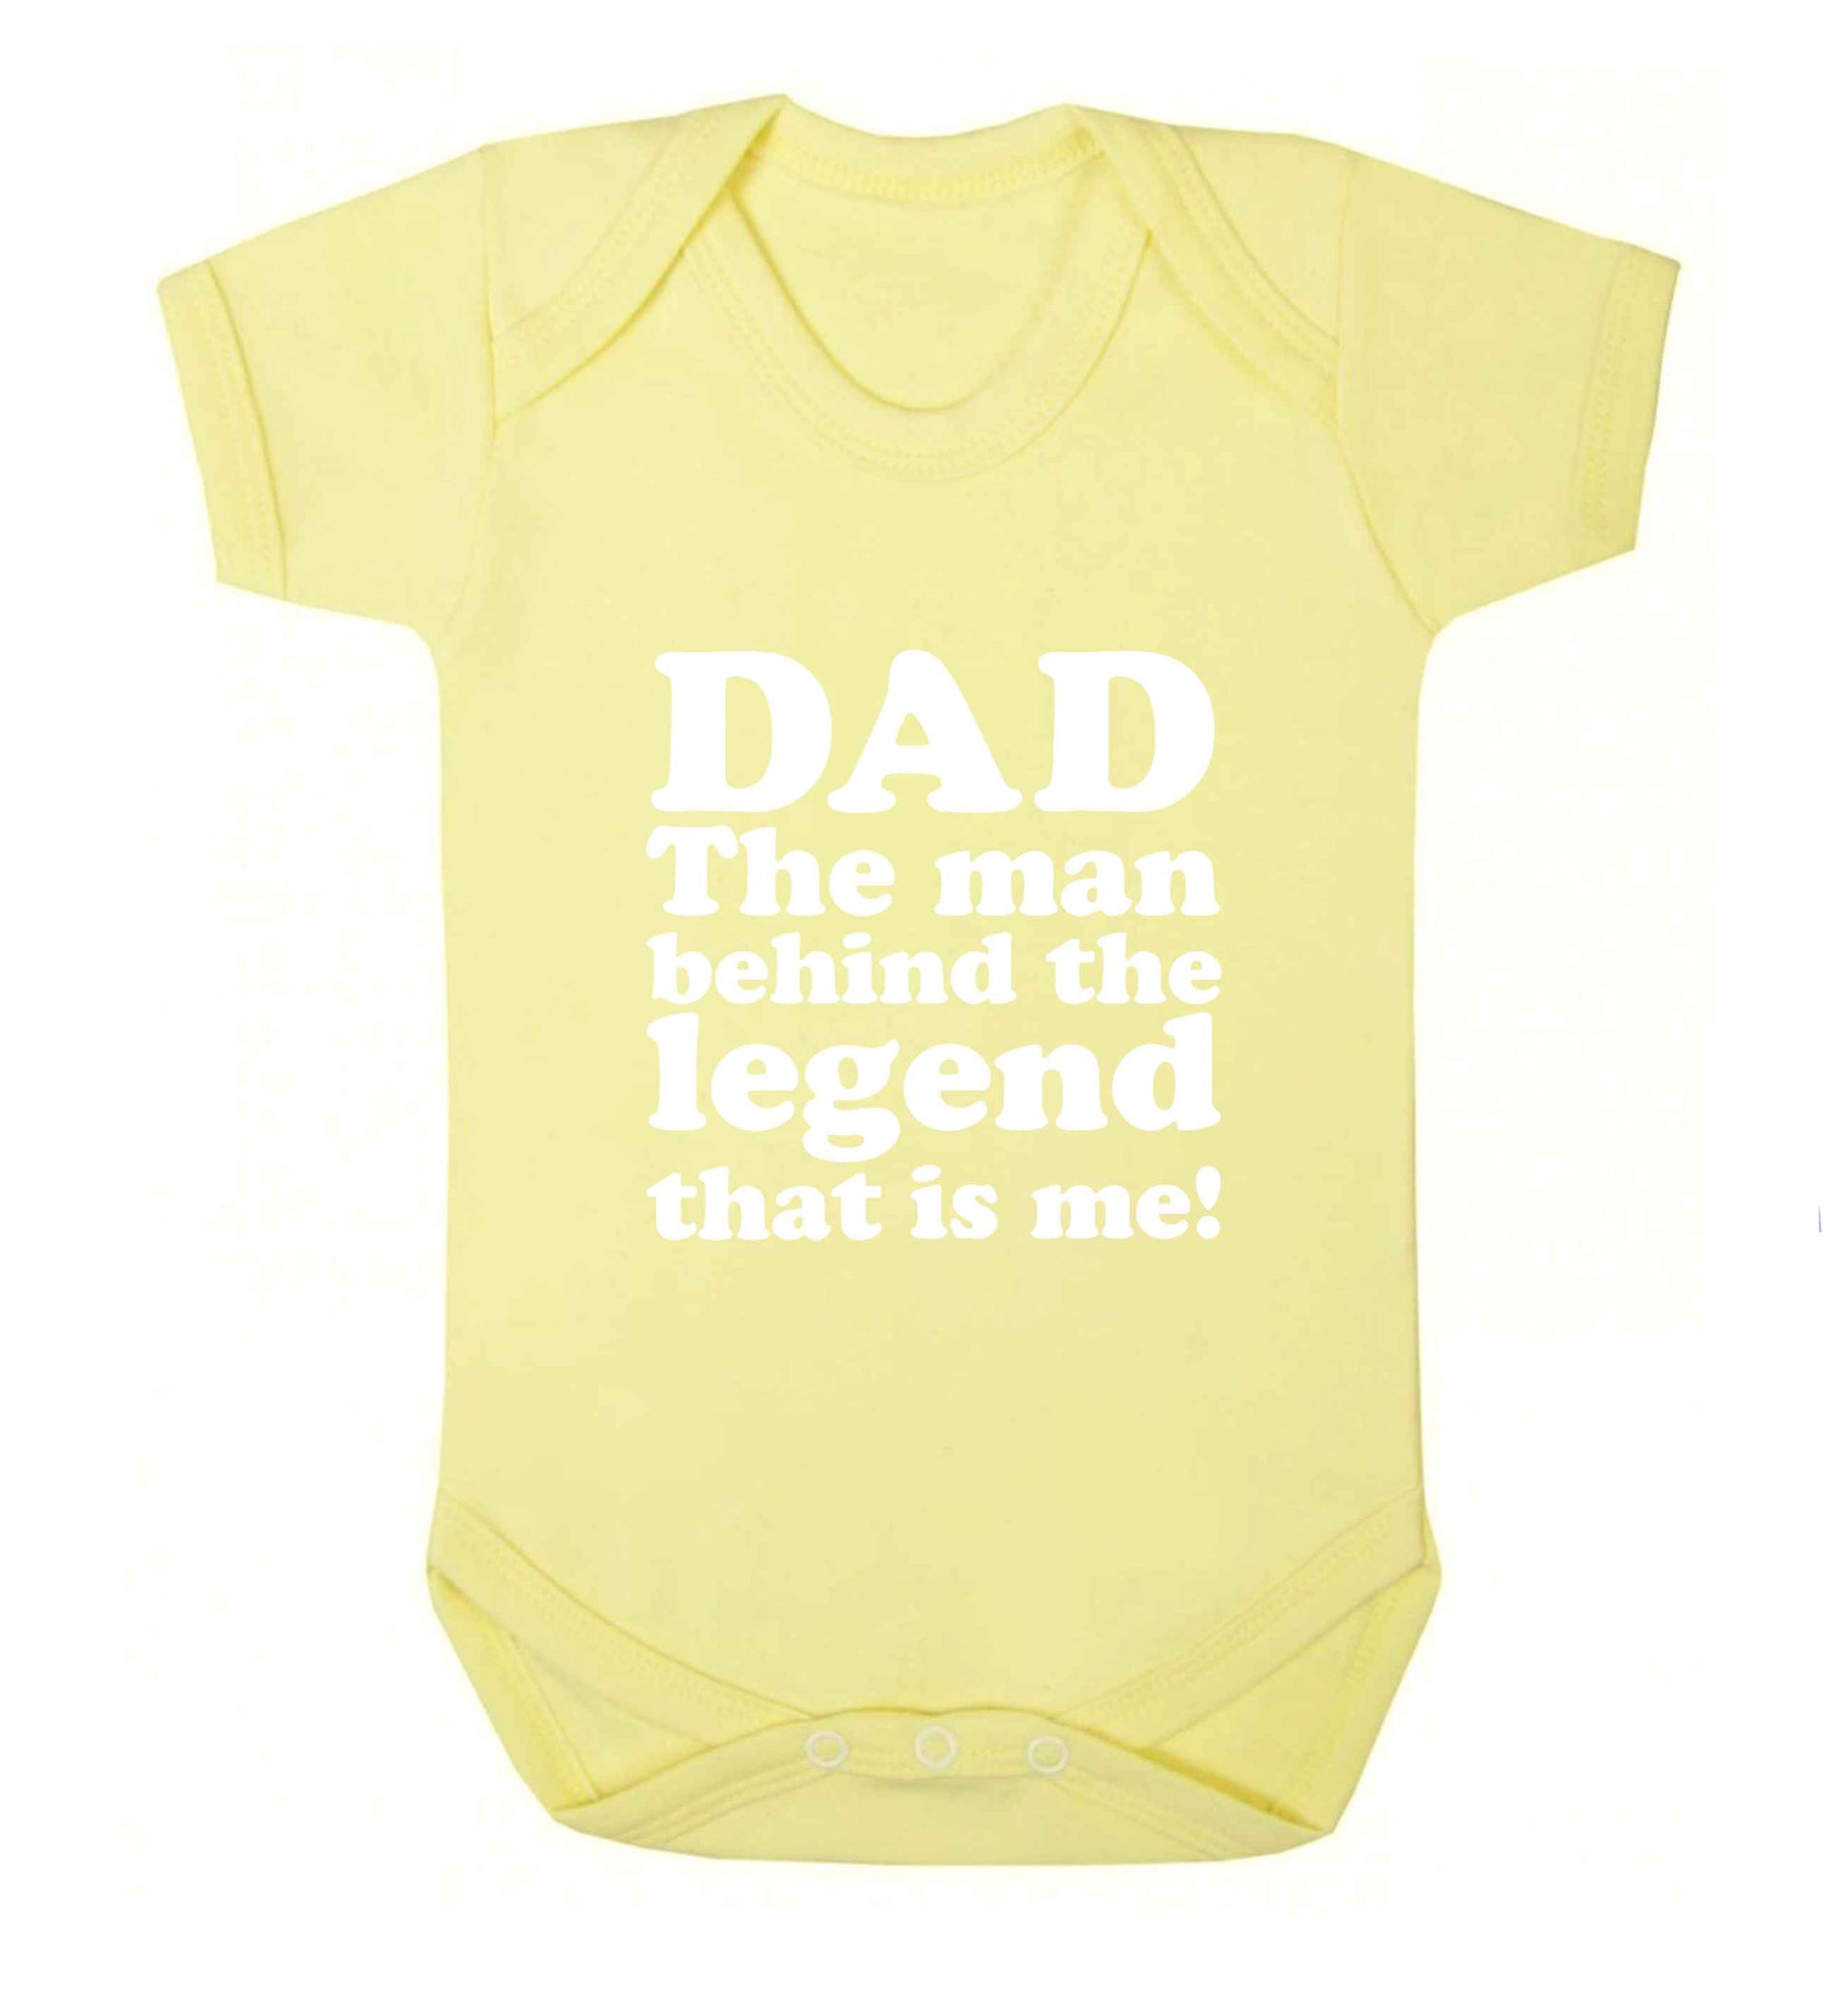 Dad the man behind the legend that is me baby vest pale yellow 18-24 months